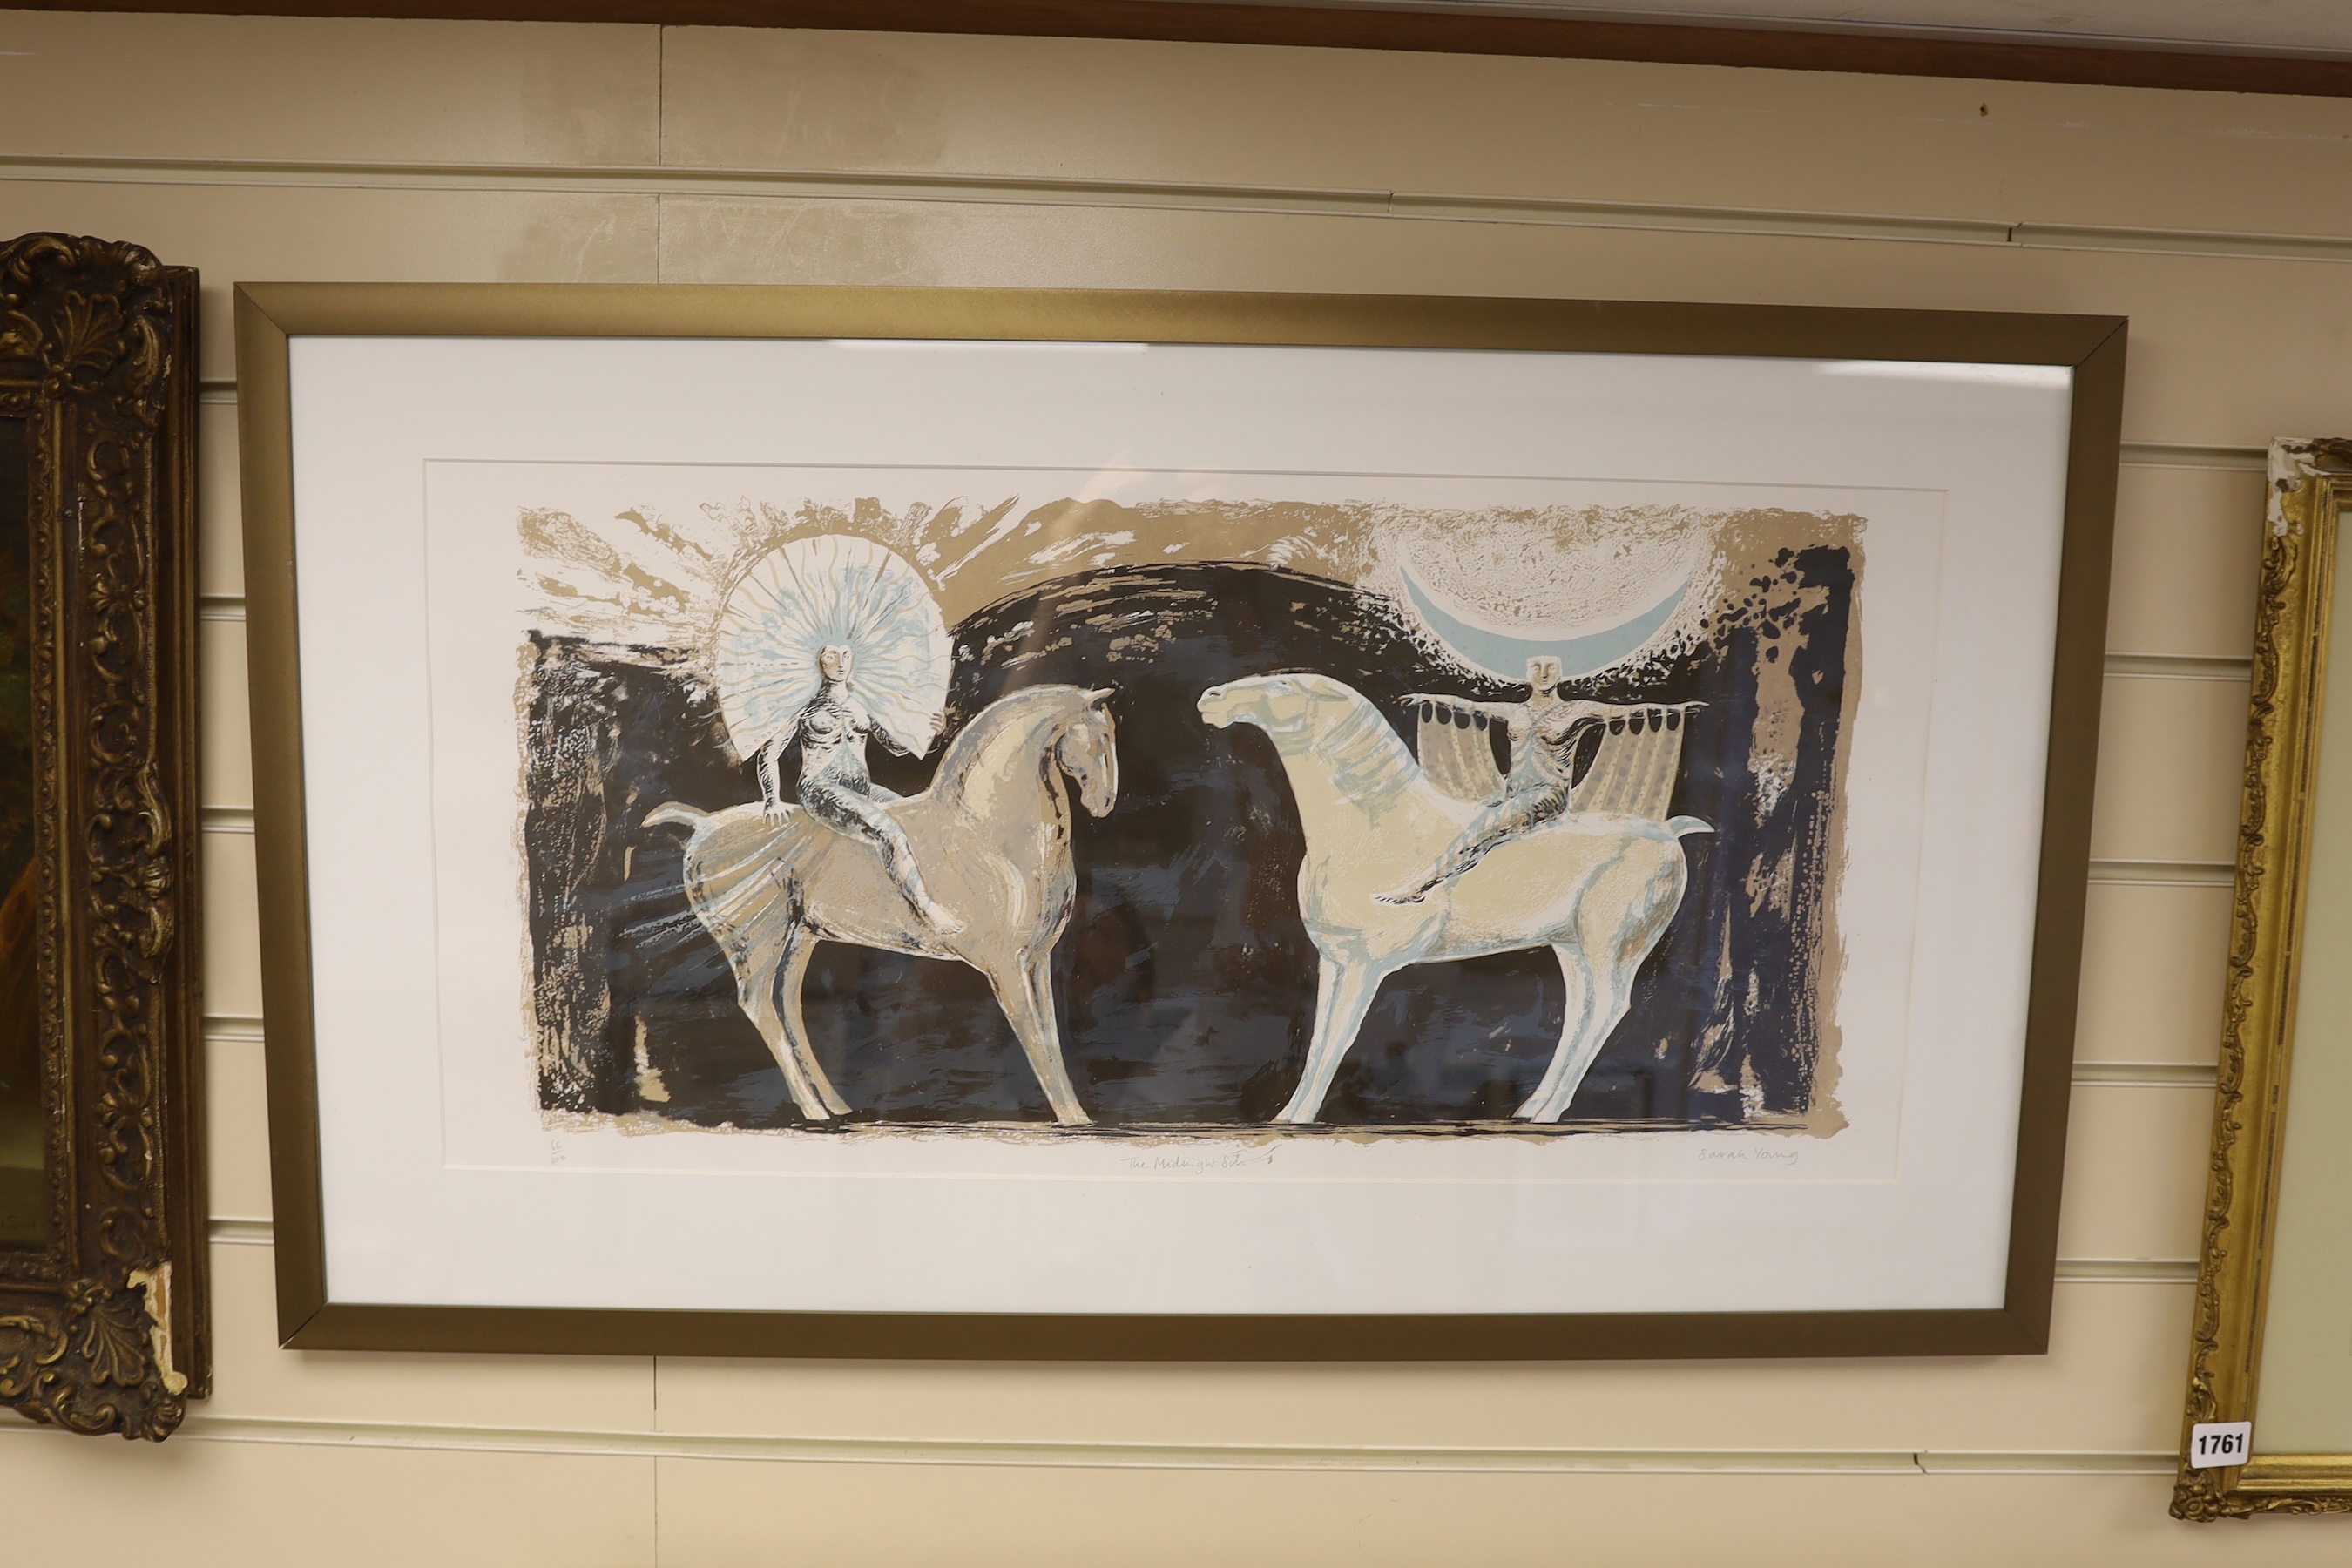 Sarah Young, colour print, 'The Midnight Sun', signed in pencil, limited edition 66/100, 32 x 68cm